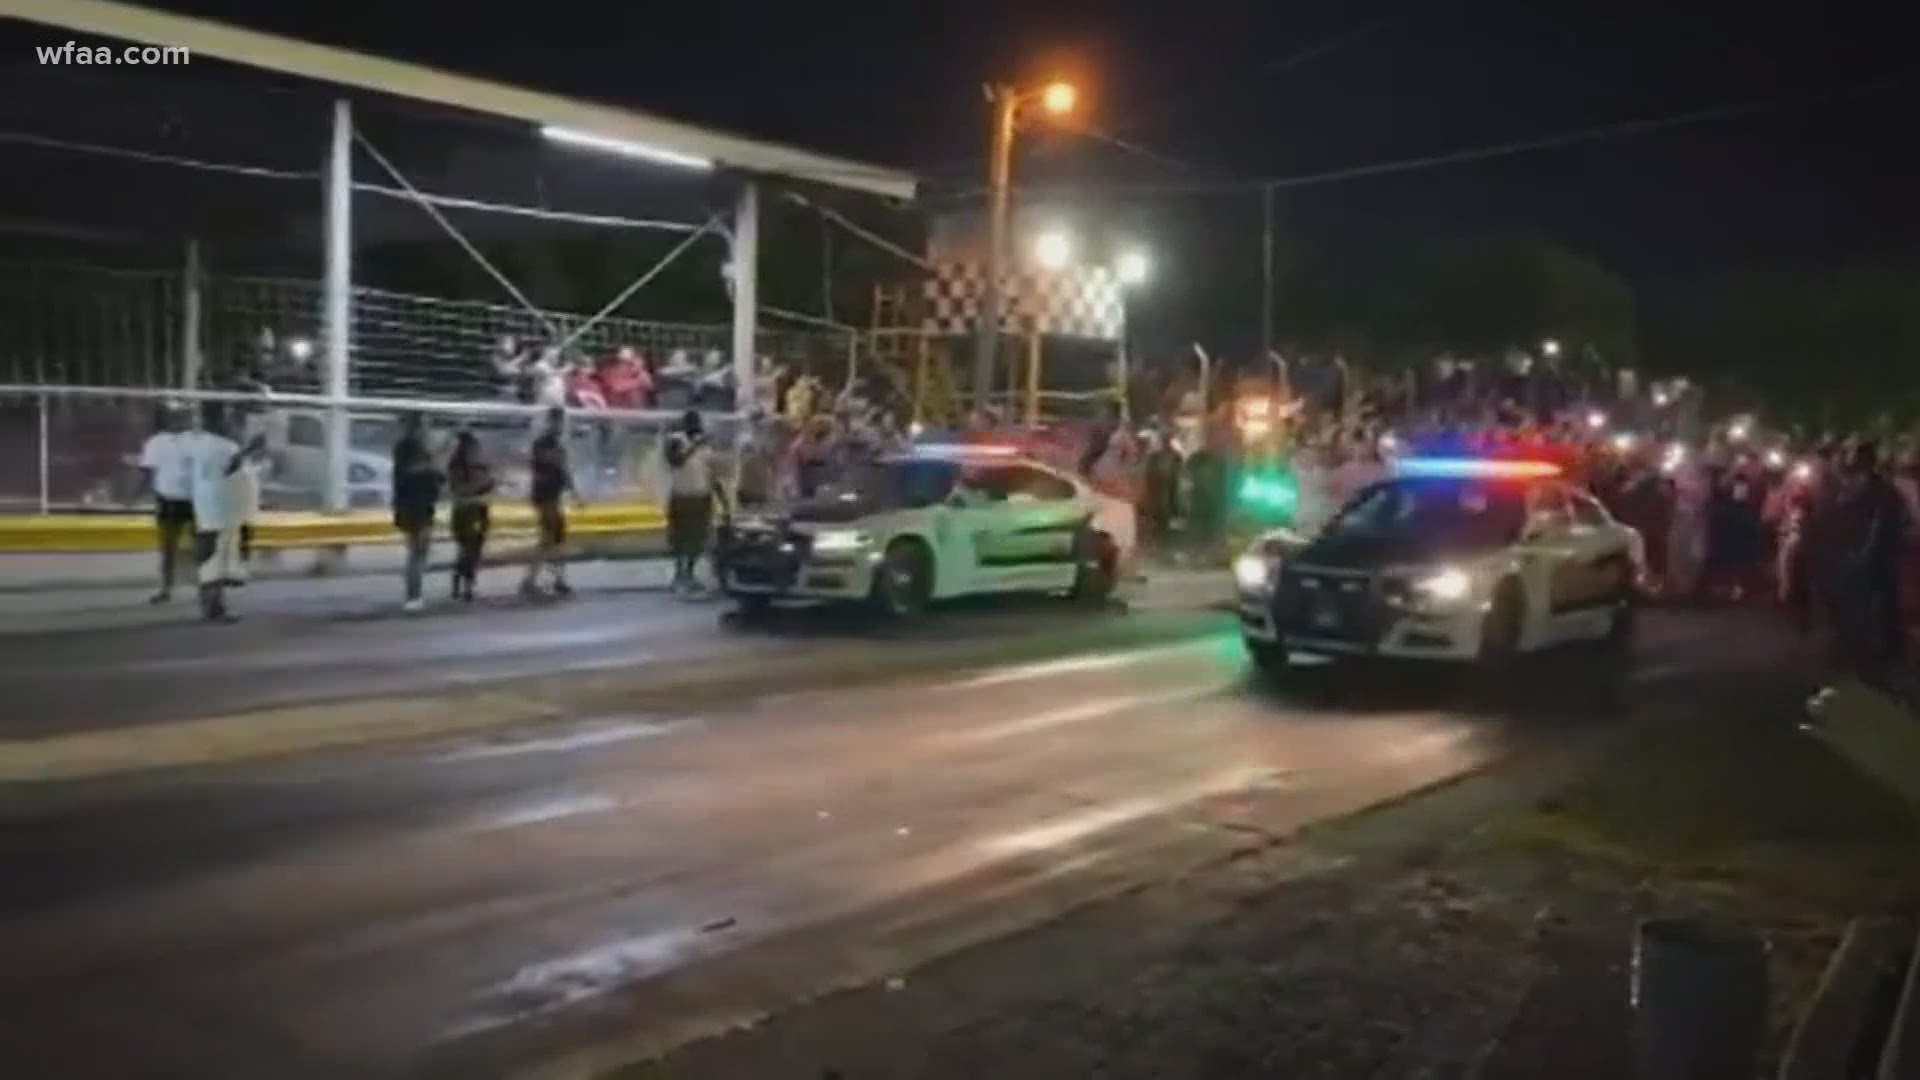 Viral video shows two Dallas County Sheriff's patrol vehicles racing before a crowd at a drag strip in North Texas.